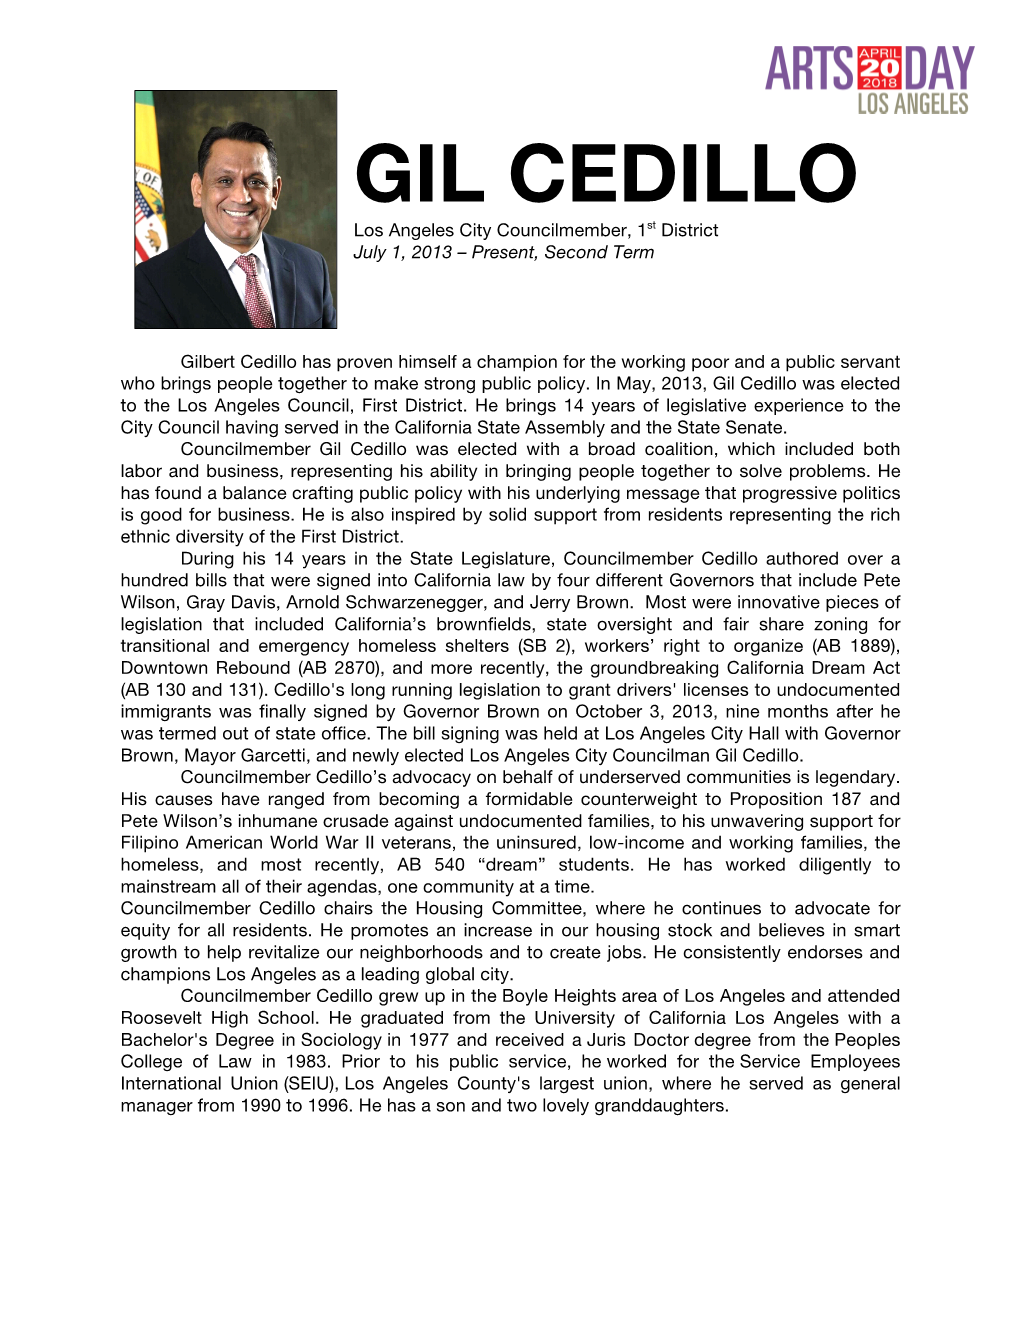 GIL CEDILLO Los Angeles City Councilmember, 1St District July 1, 2013 – Present, Second Term